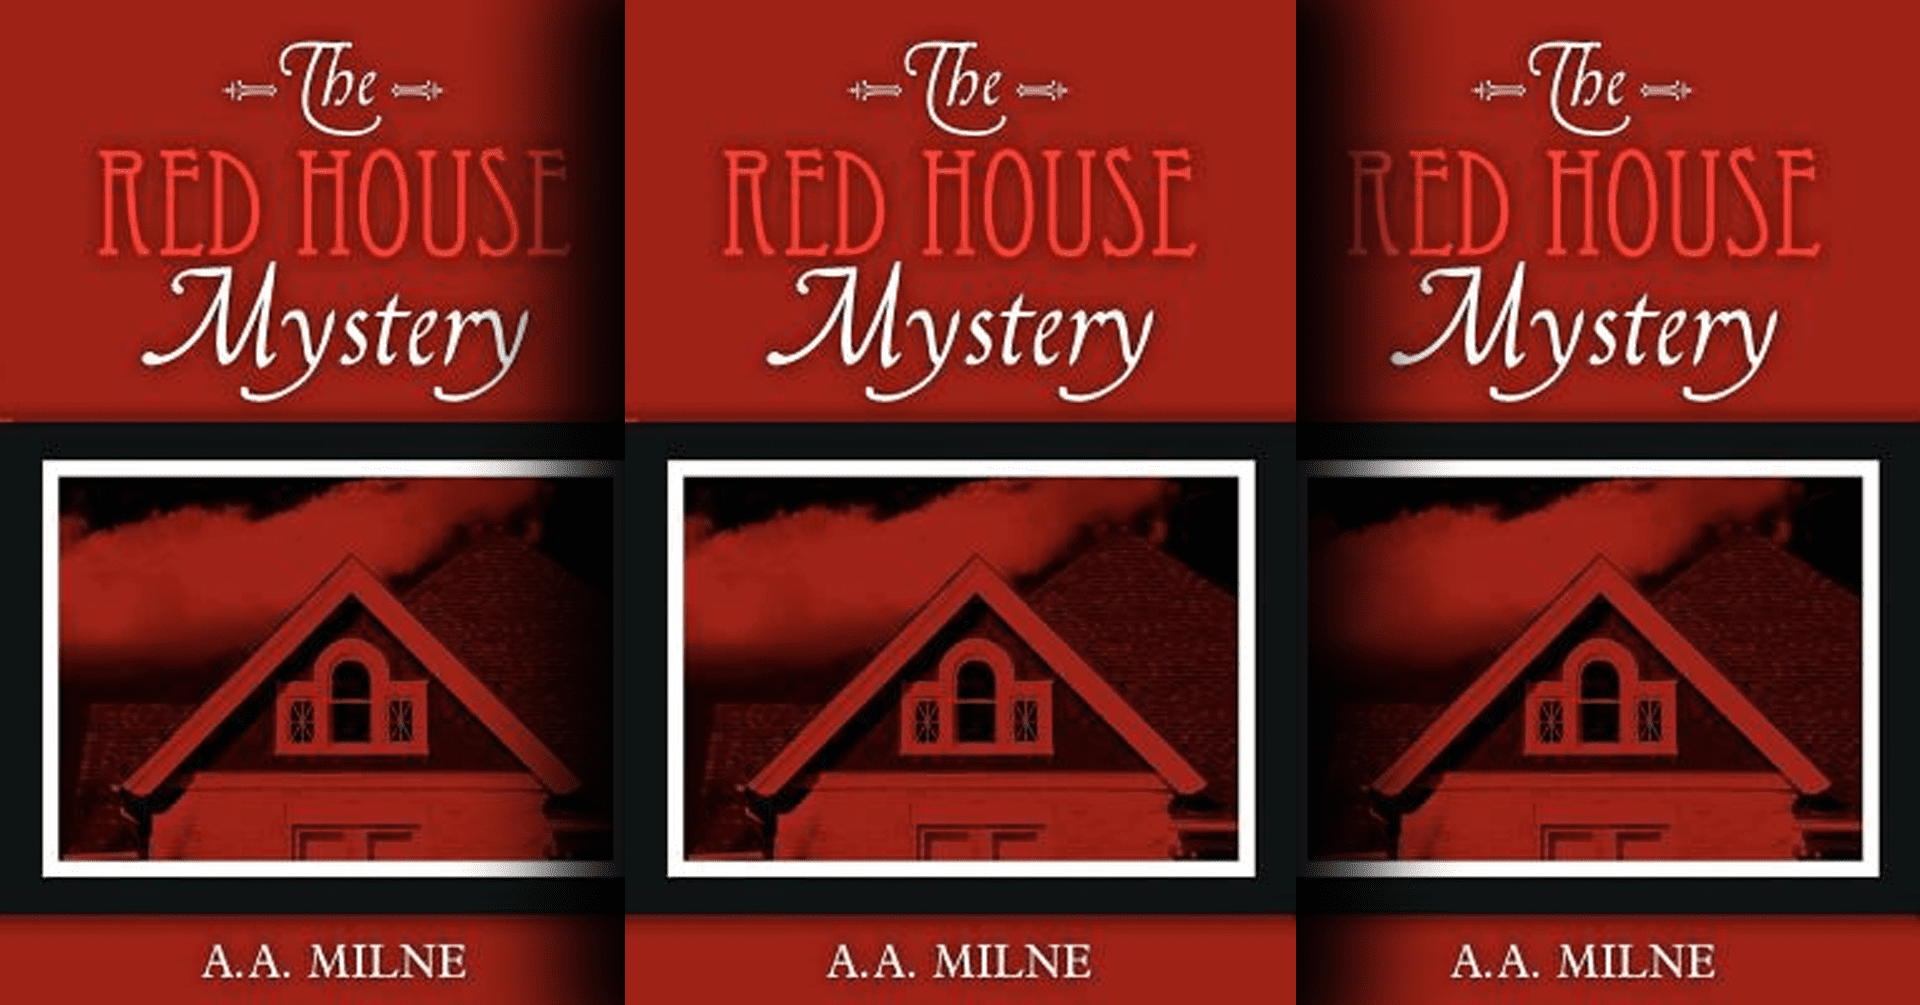 The Red House Mystery by A.A. Milne (Book Cover)